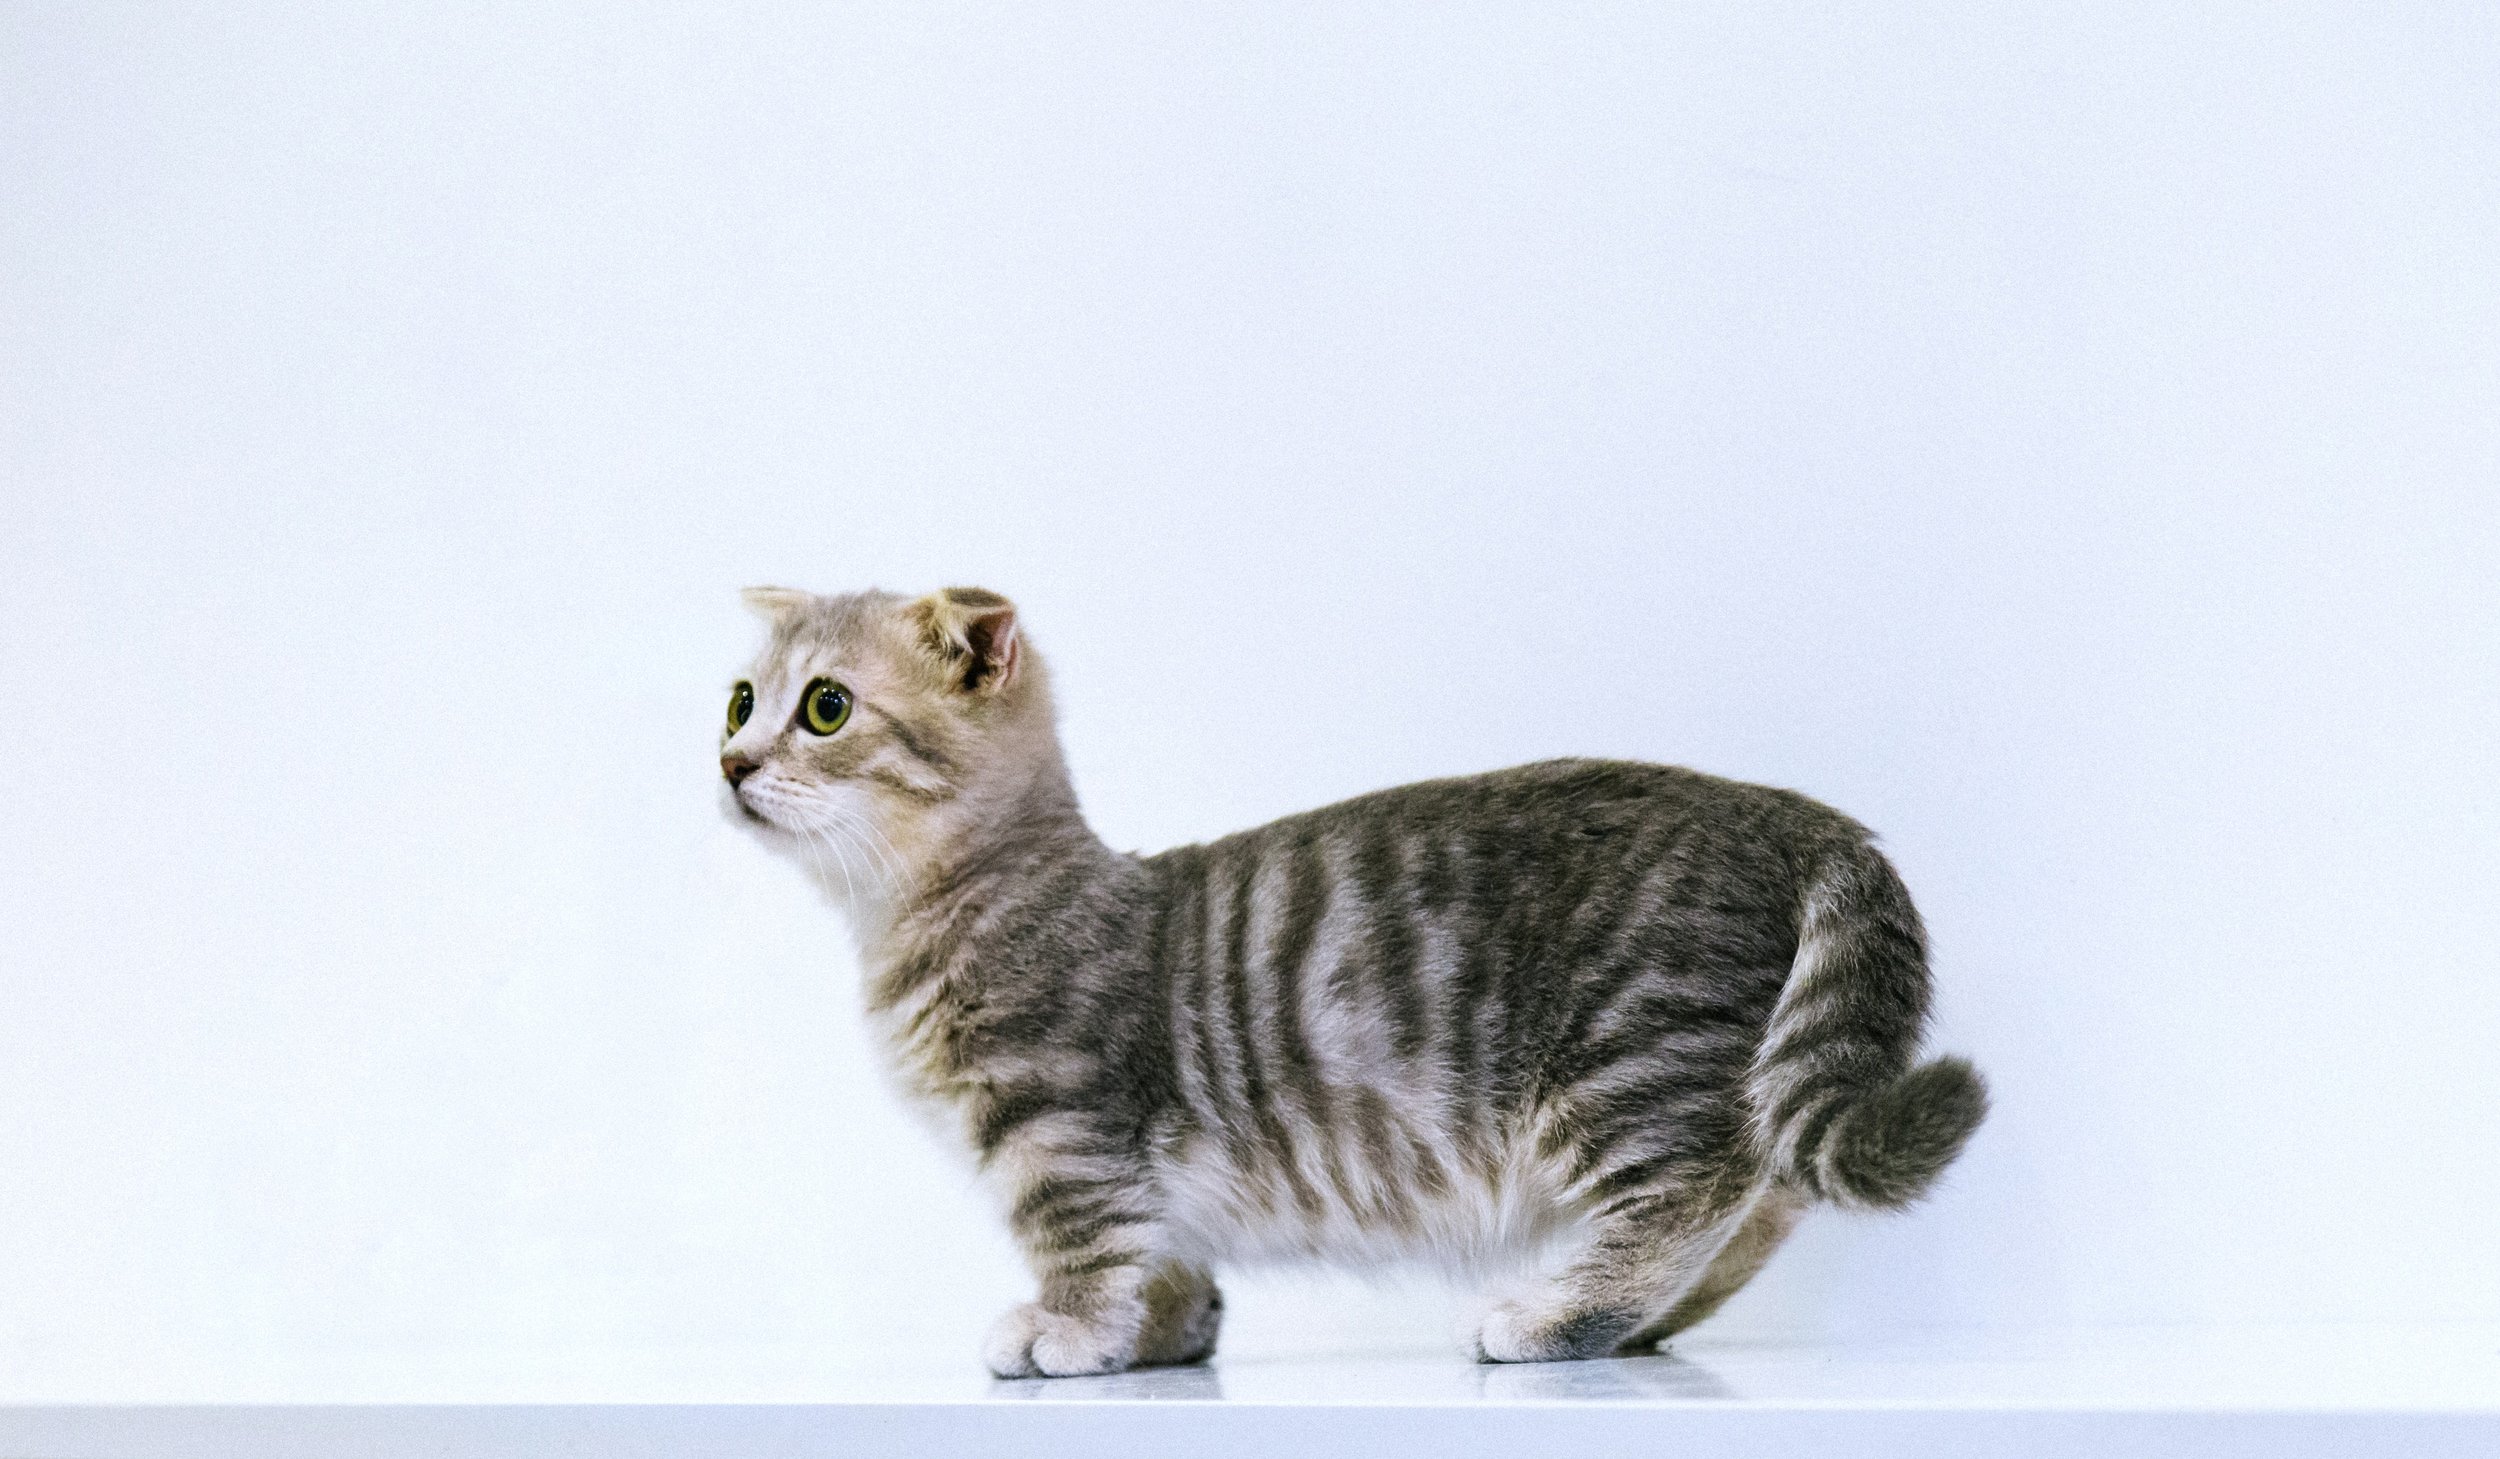 Munchkin cat: do they suffer? — The Little Carnivore